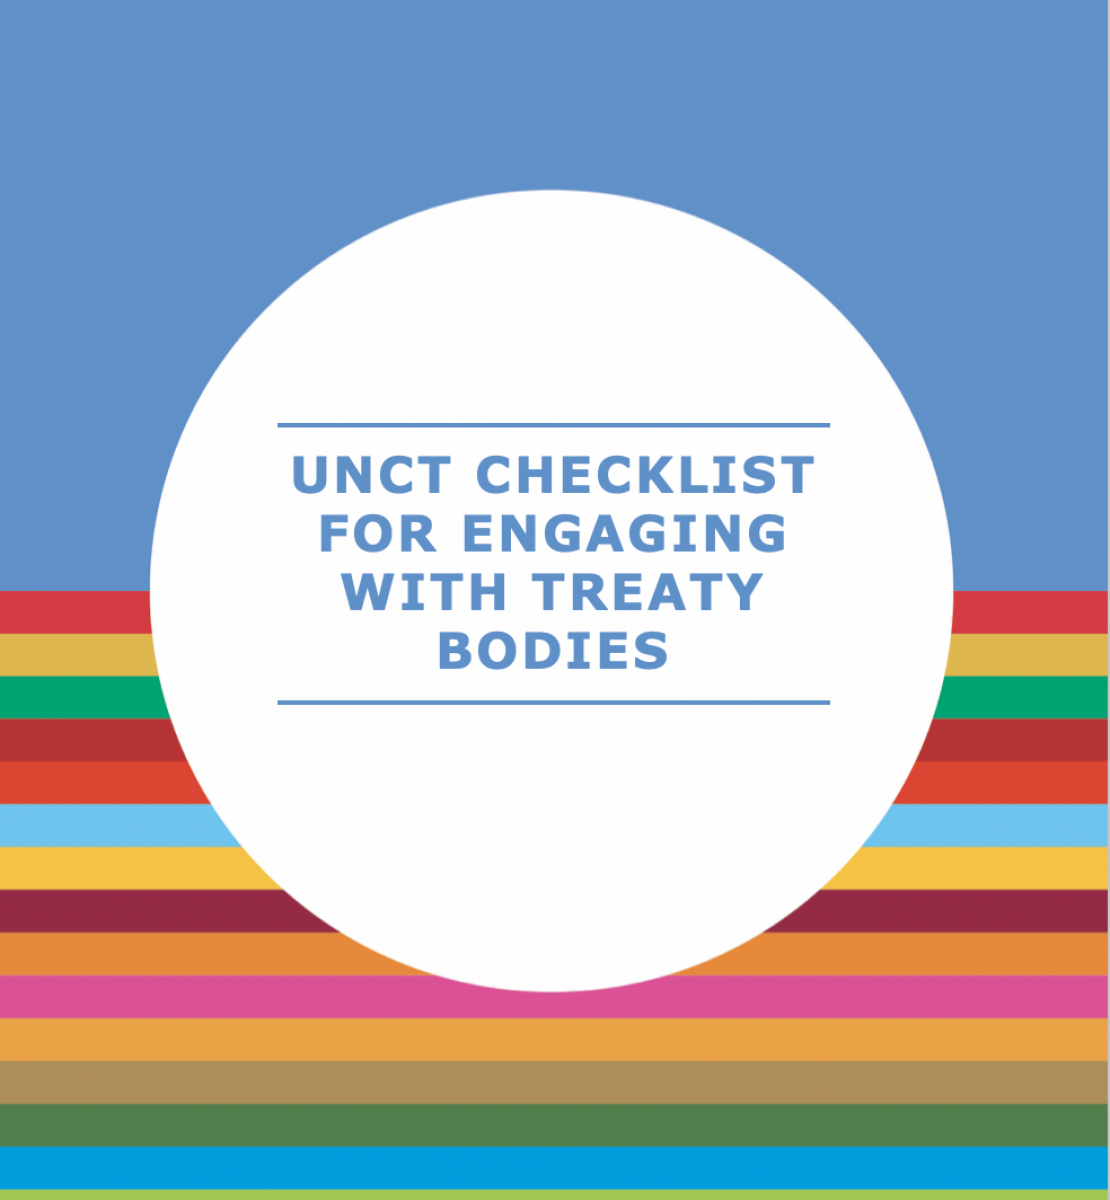 Cover shows the title, "UNCT Checklist for Engaging with Treaty Bodies" in the centre of a solid circle in front of a solid and striped background.